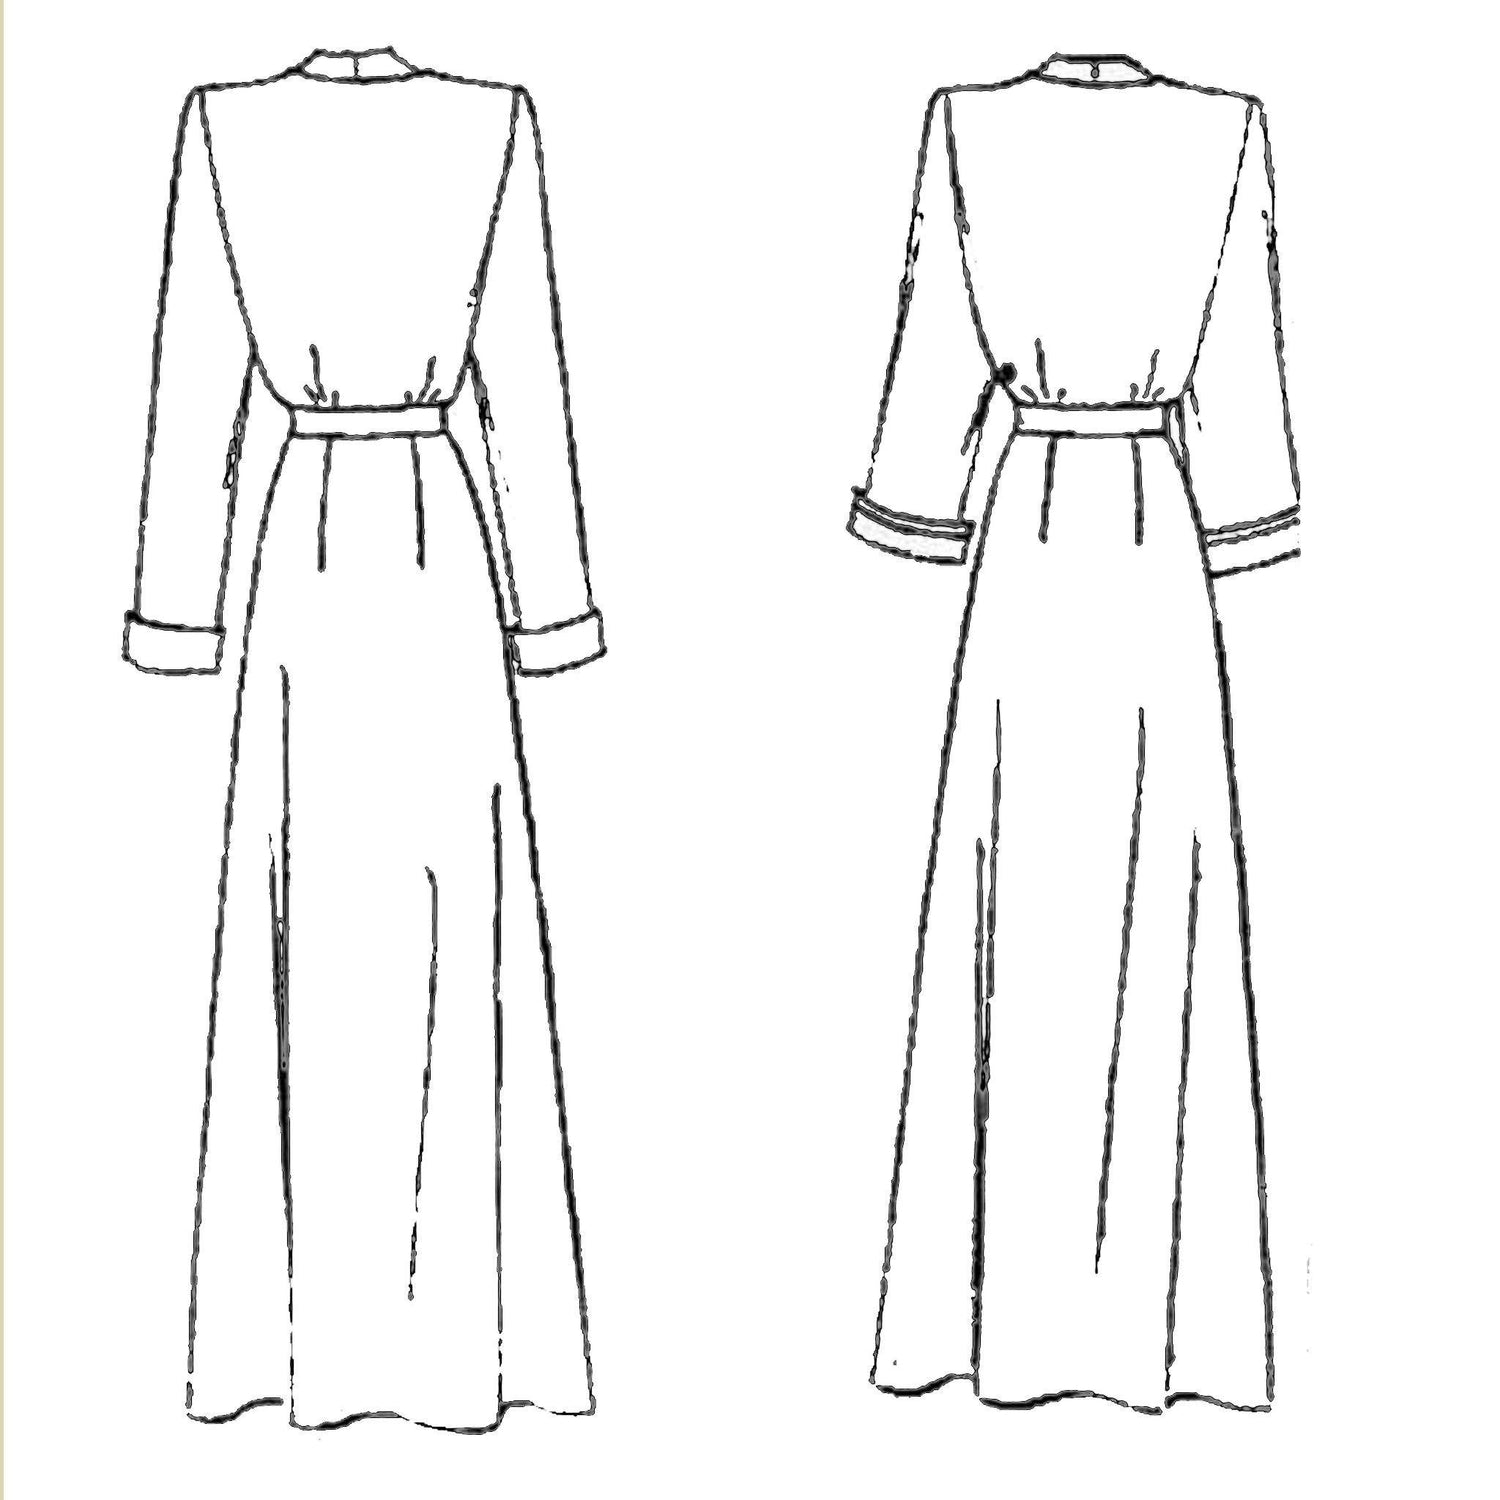 Outline drawings of robe back views.